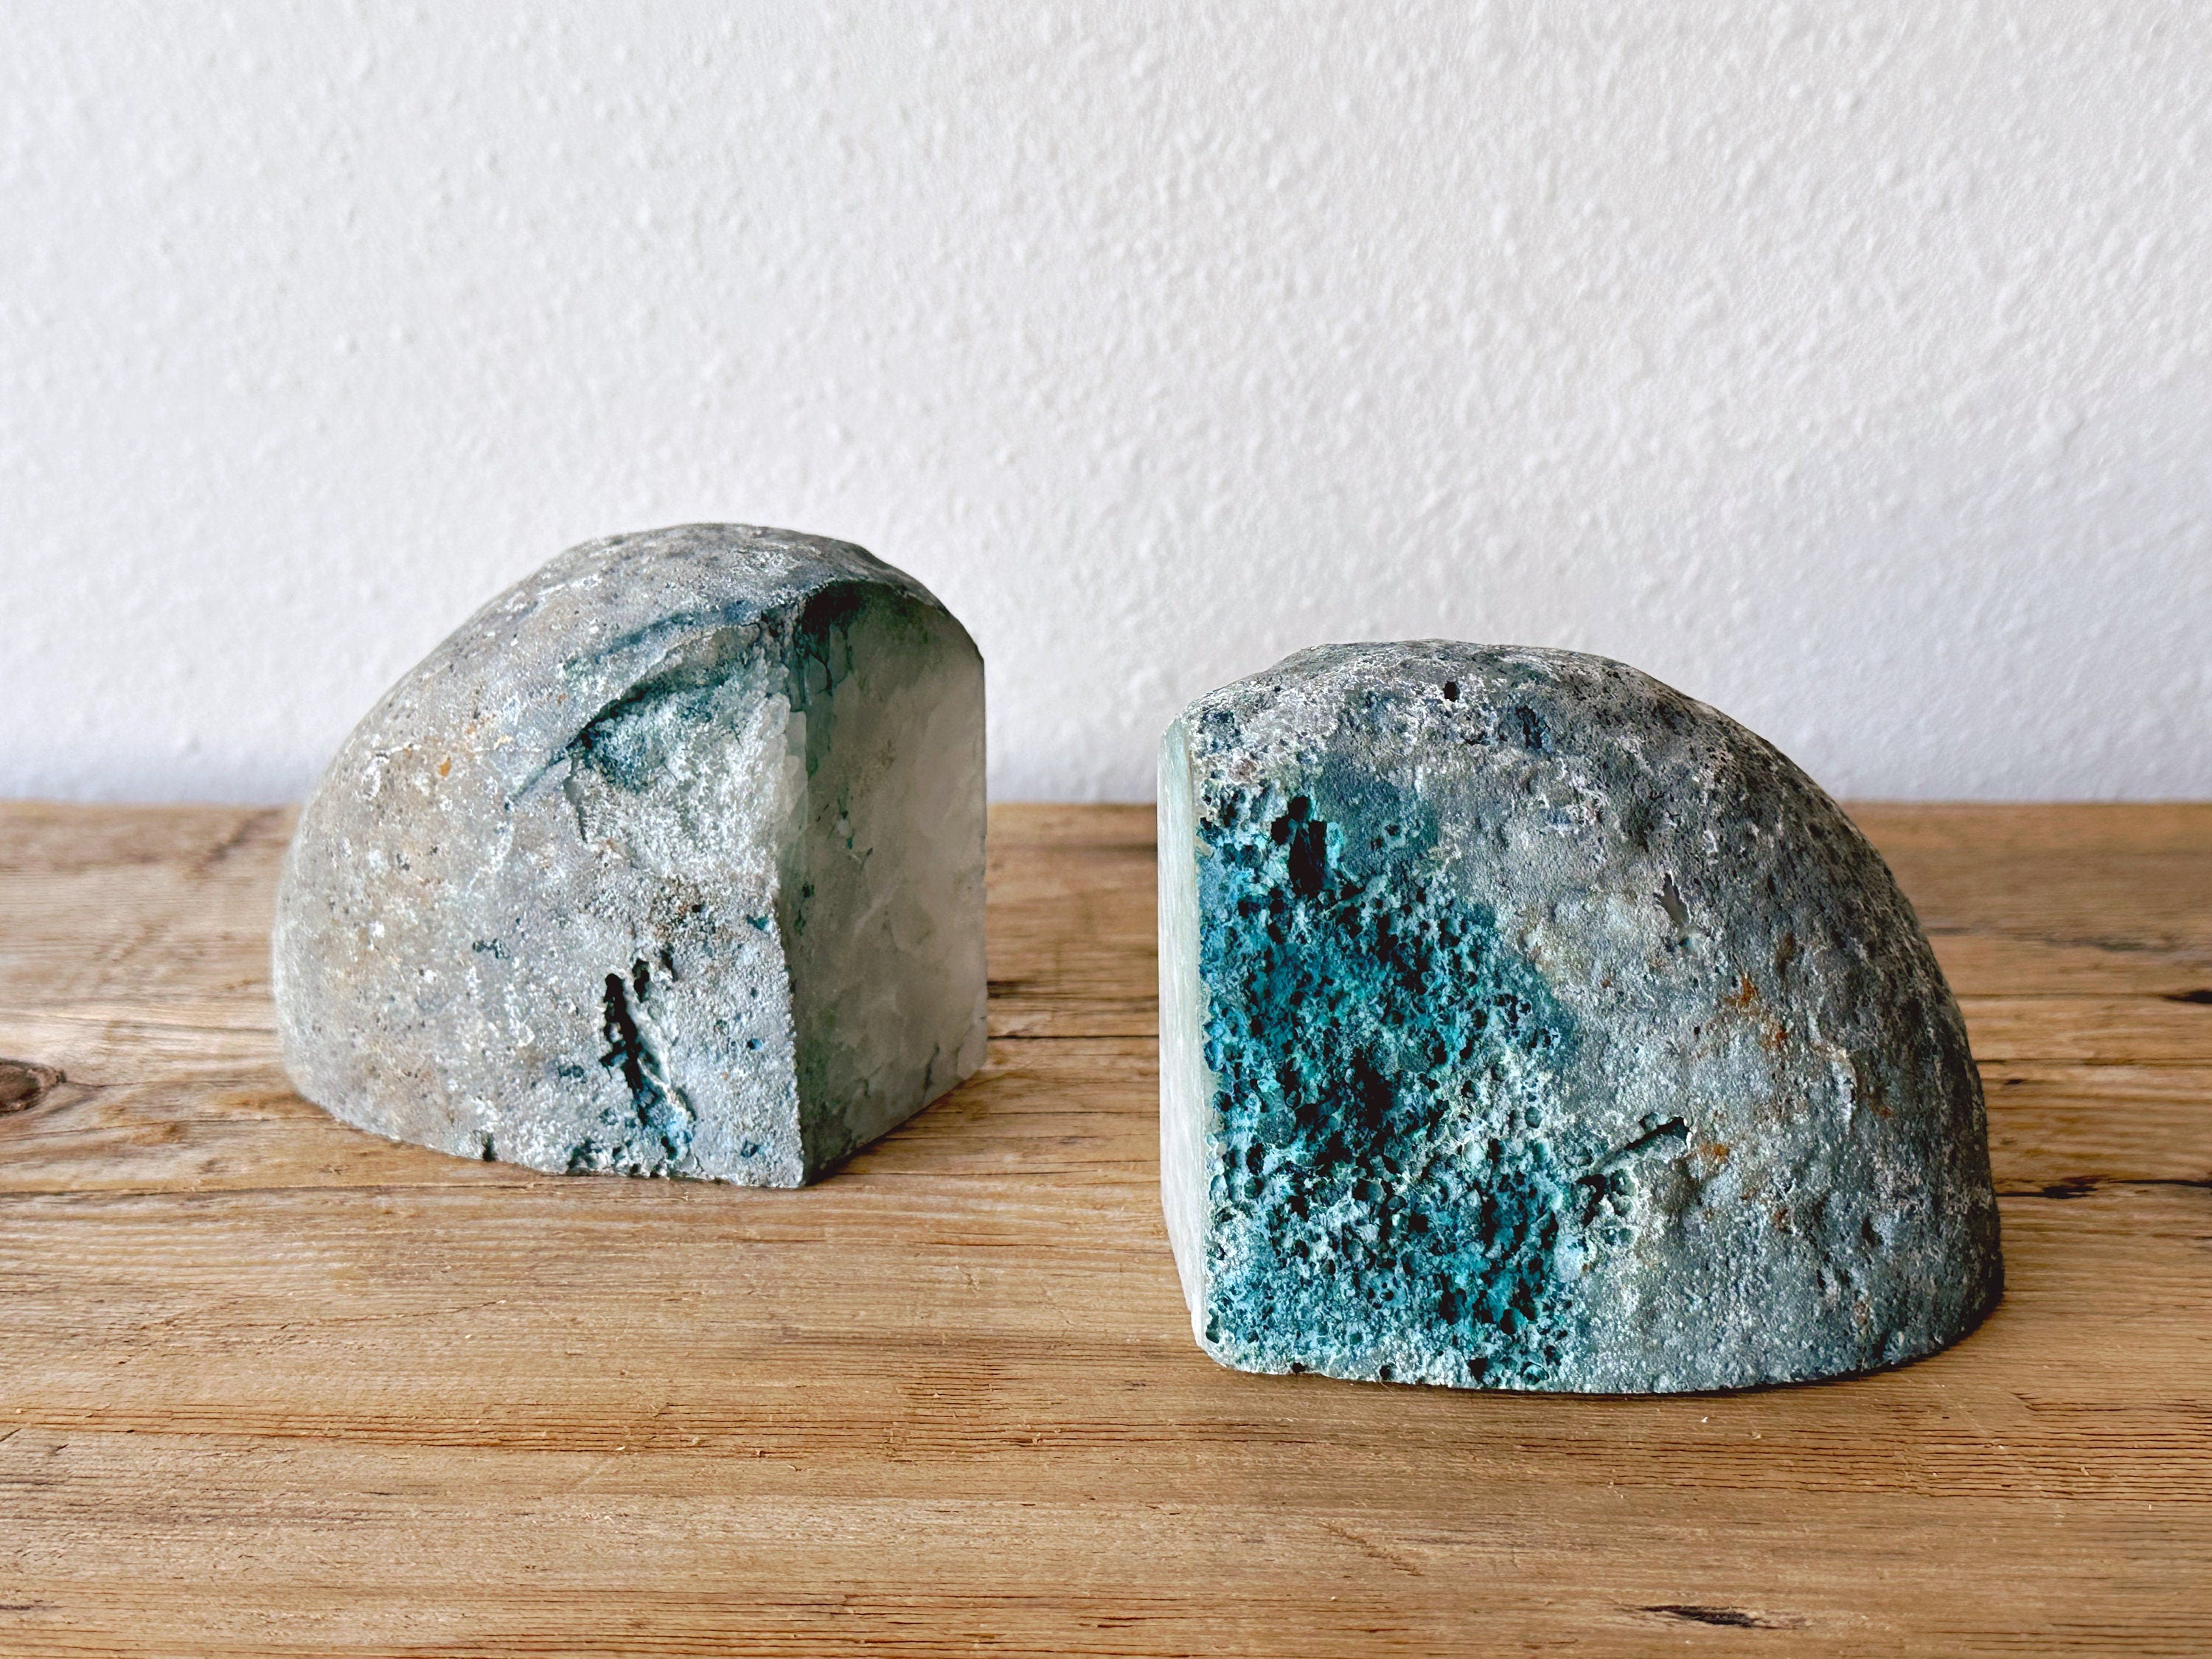 Pair of Natural Brazilian Agate Geode Stone Bookends | Blue Banded Agate Gemstone Bookends | Office Bookshelf Decor | Housewarming Gift